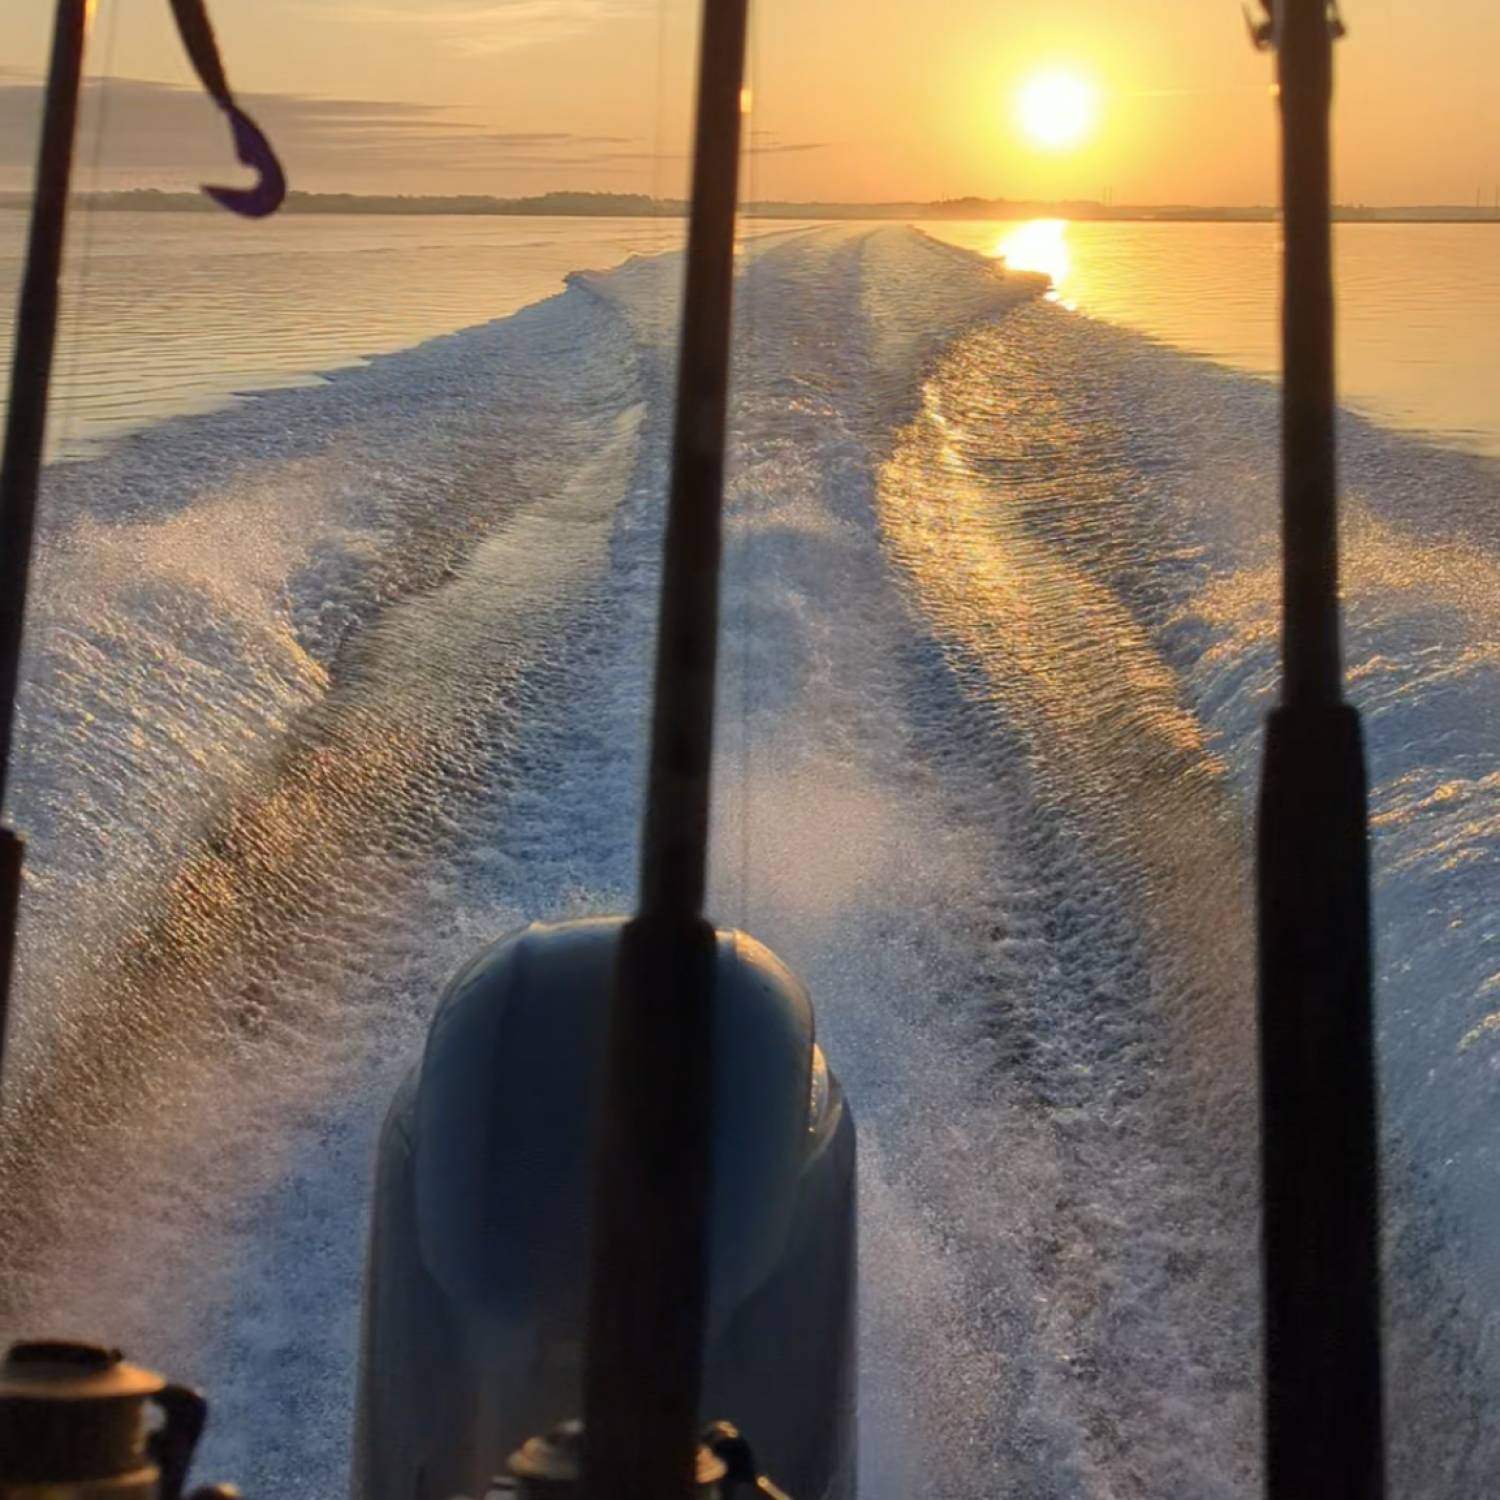 Title: Morning Ride Out - On board their Sportsman Masters 227 Bay Boat - Location: Charleston SC. Participating in the Photo Contest #SportsmanJune